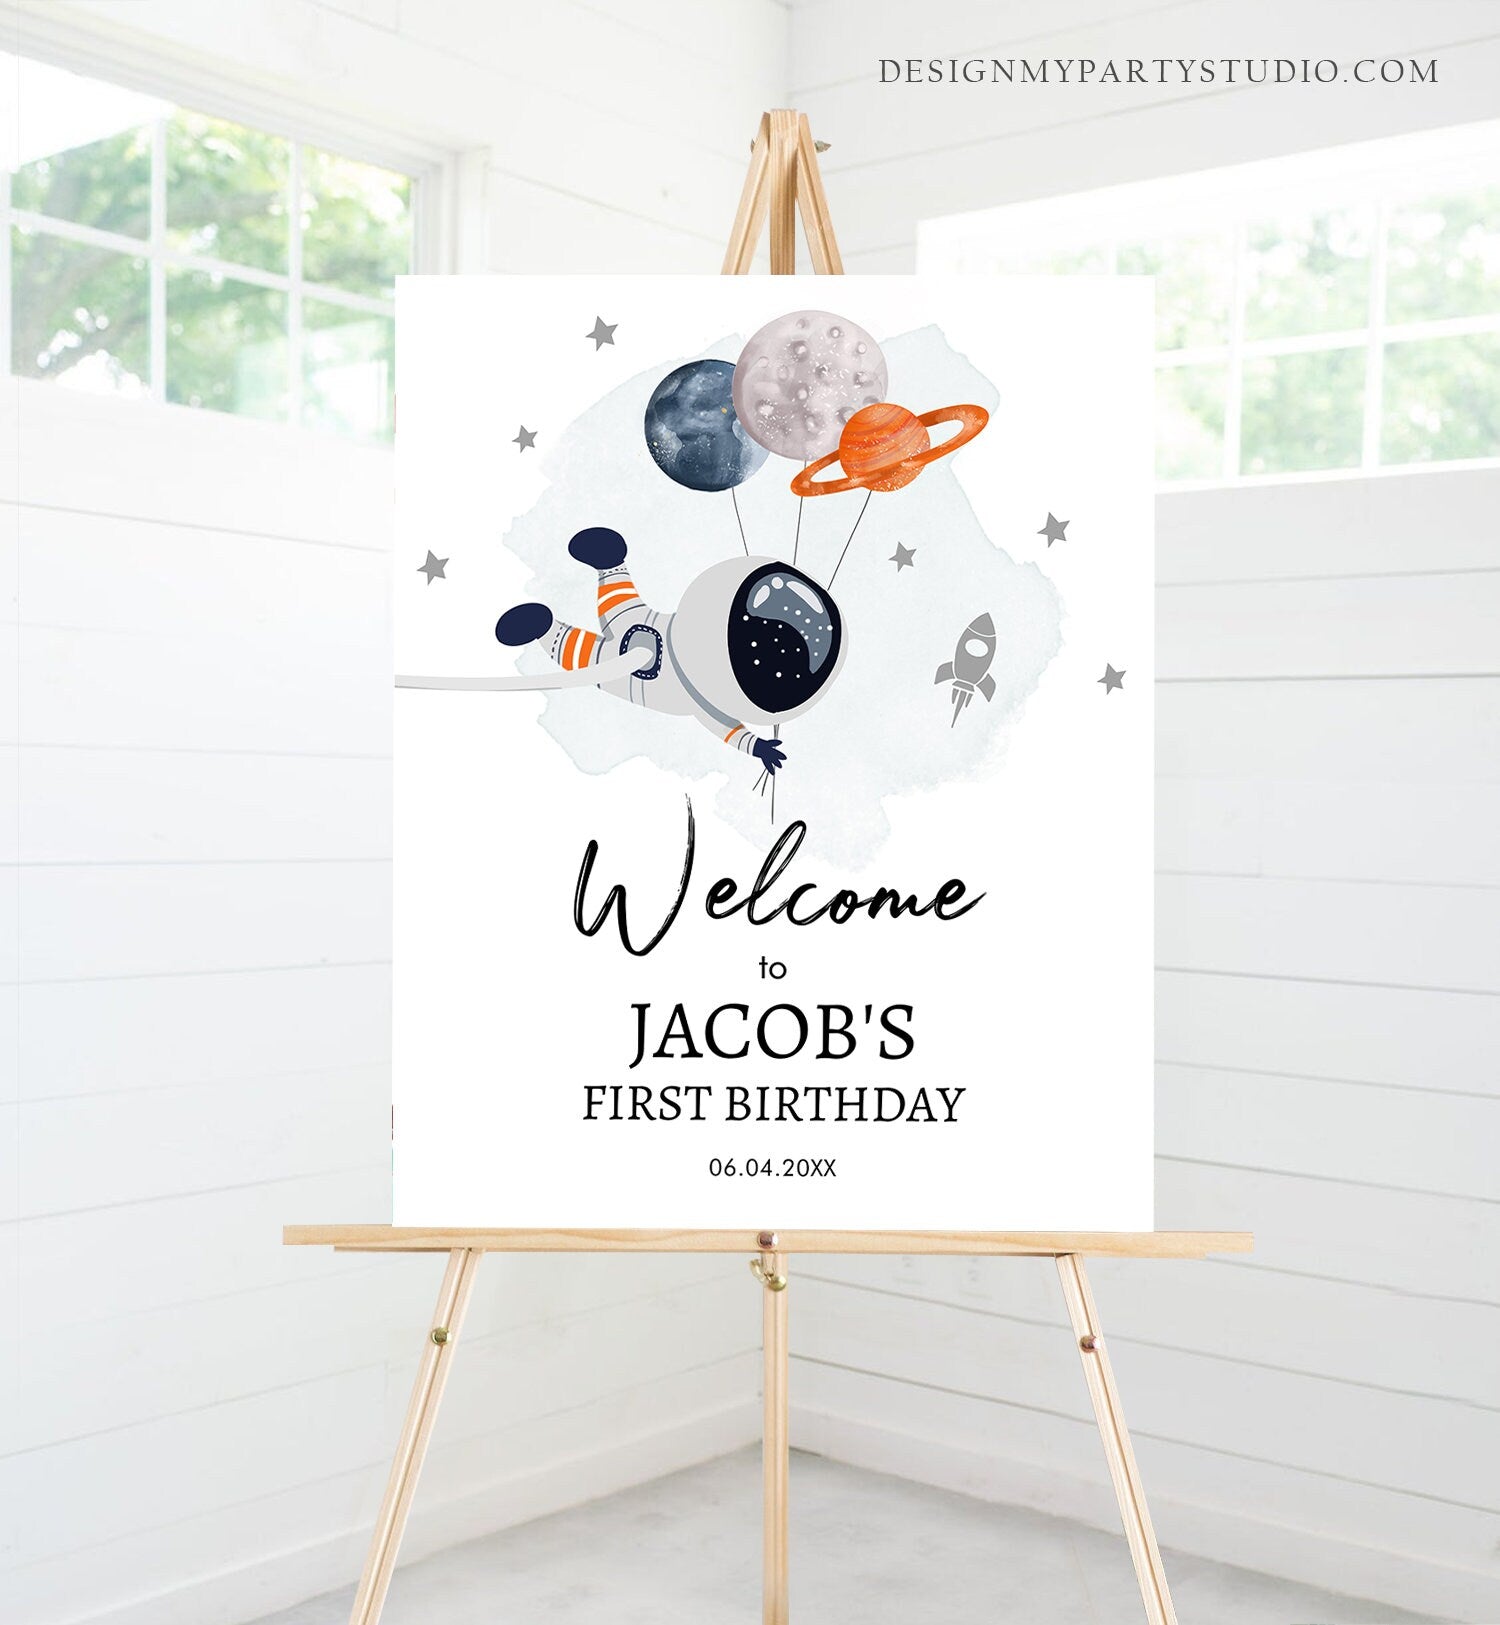 Editable Outer Space Birthday Welcome Sign 1st Birthday Boy Galaxy Planets Trip Around the Sun Astronaut Template PRINTABLE Corjl 0366